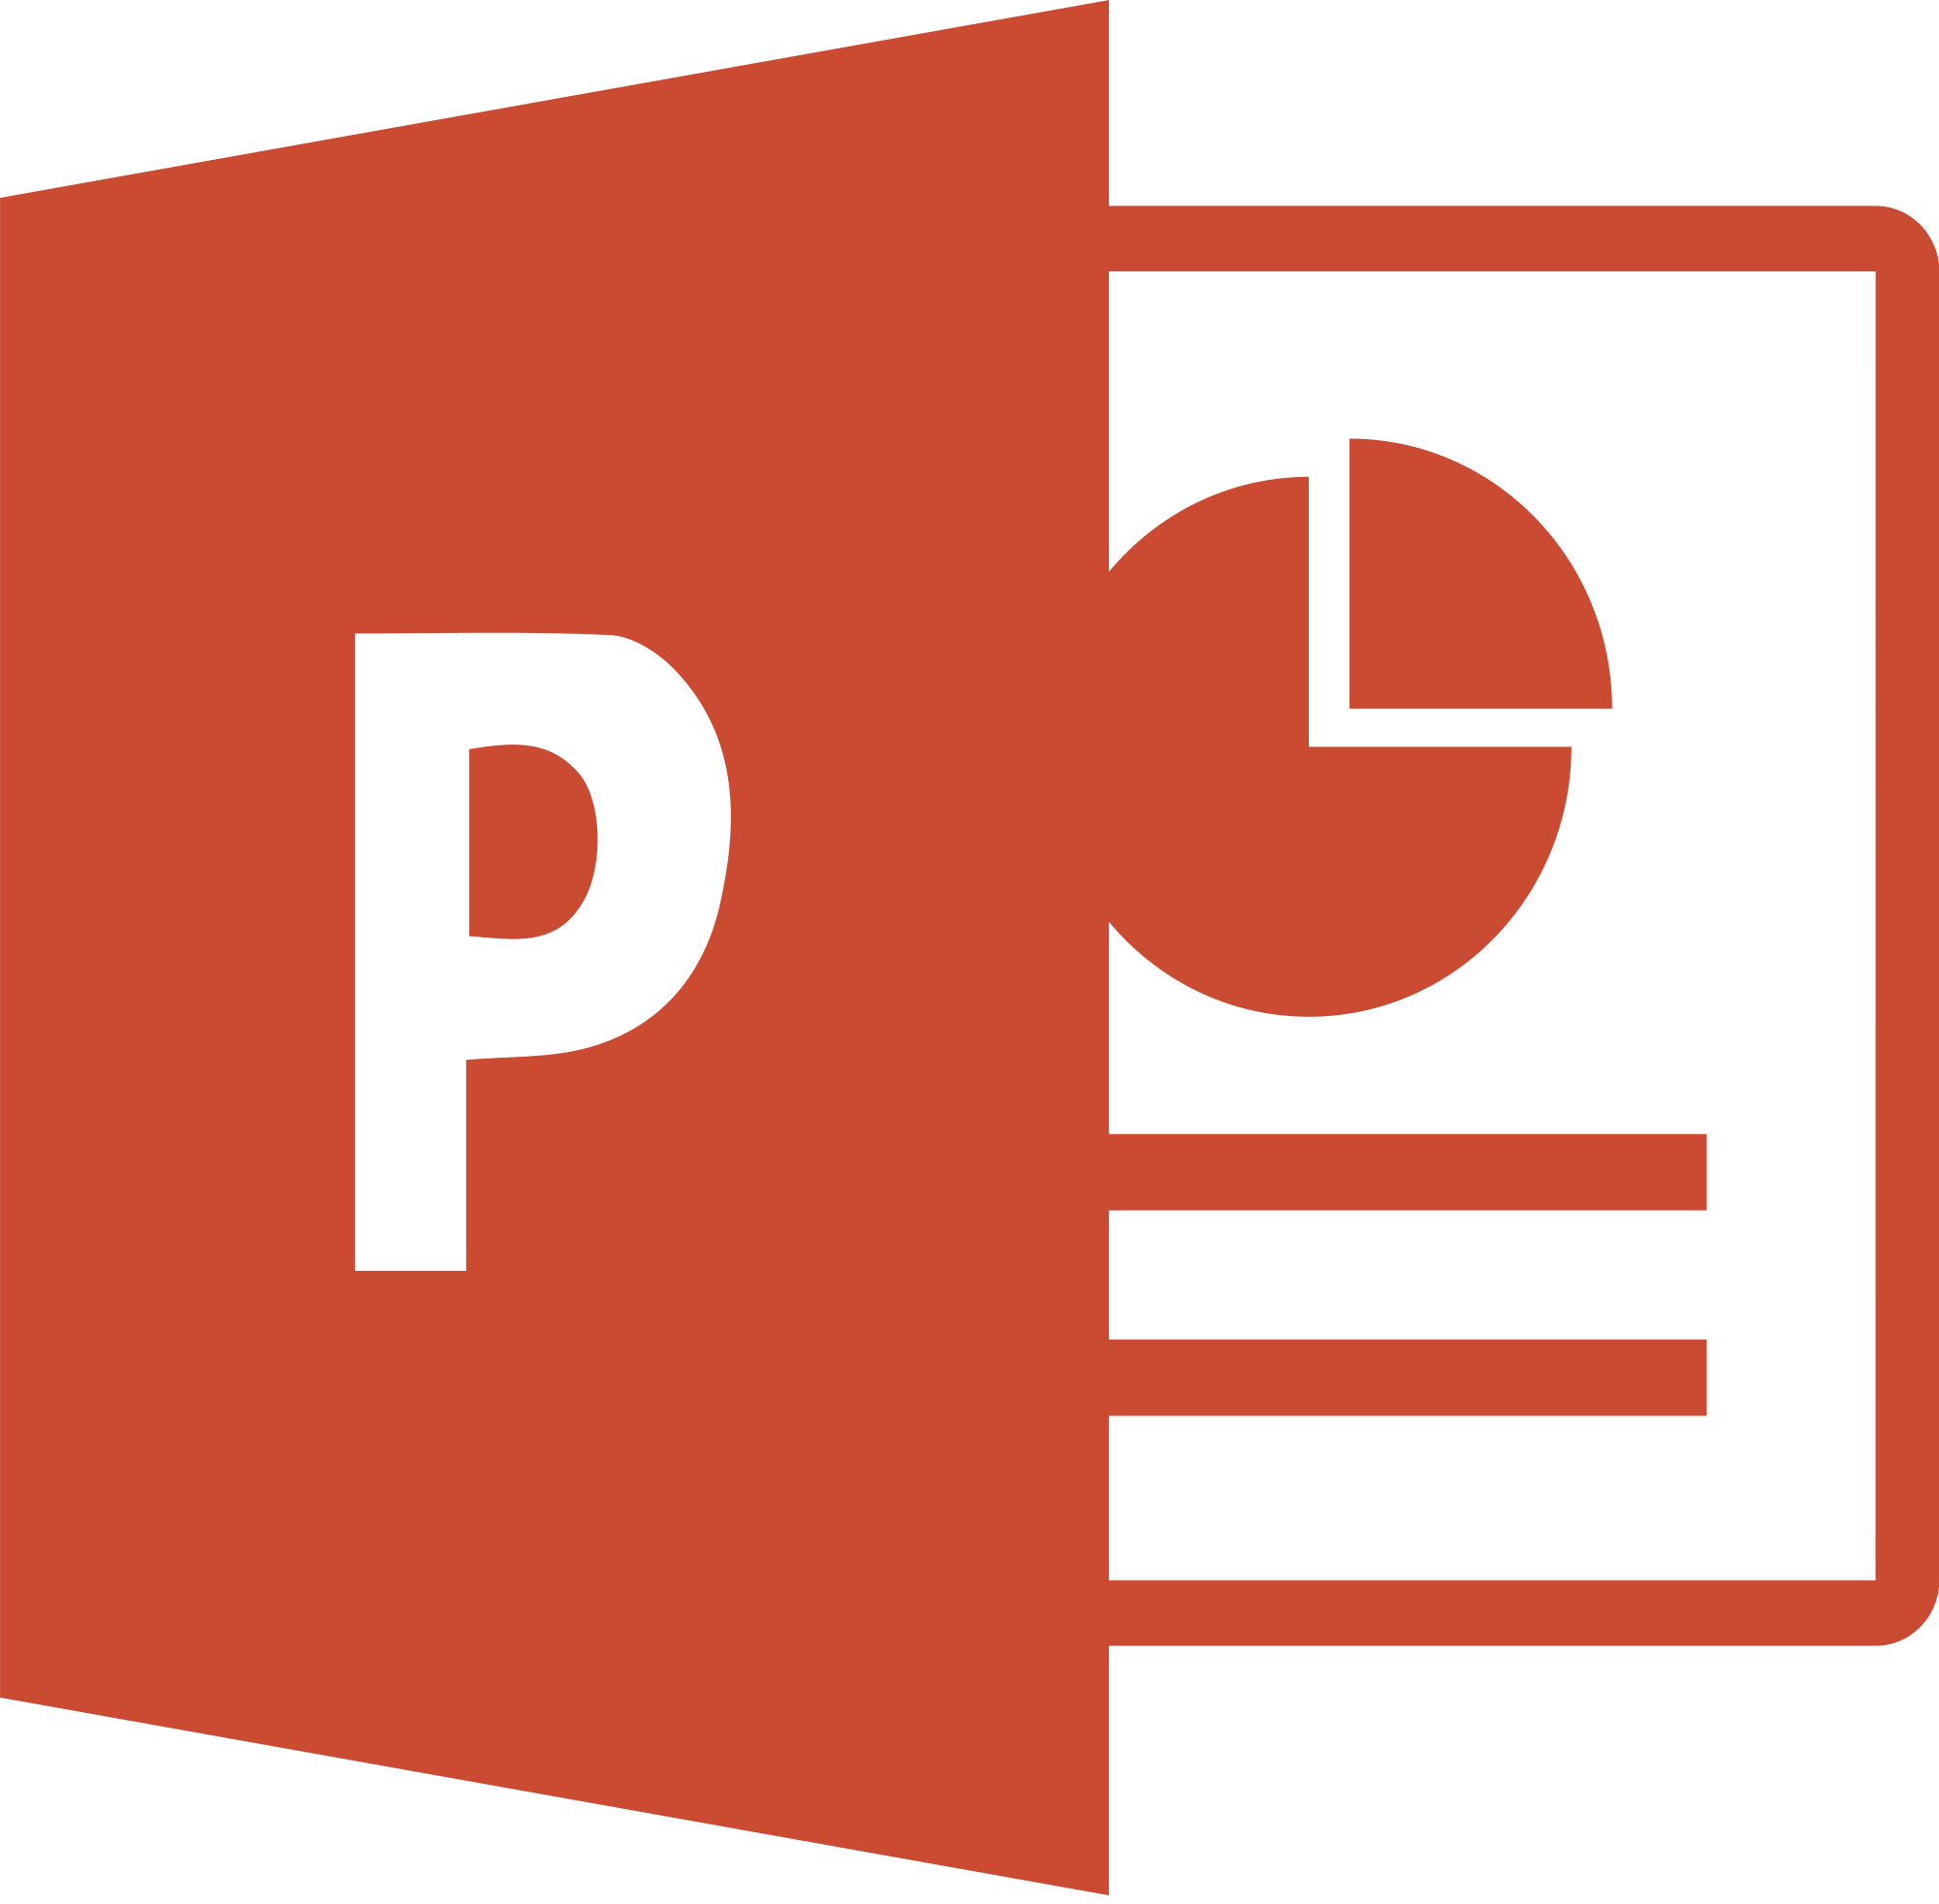 Microsoft Powerpoint 365 Online Integration Microsoft Office 365 In Vr